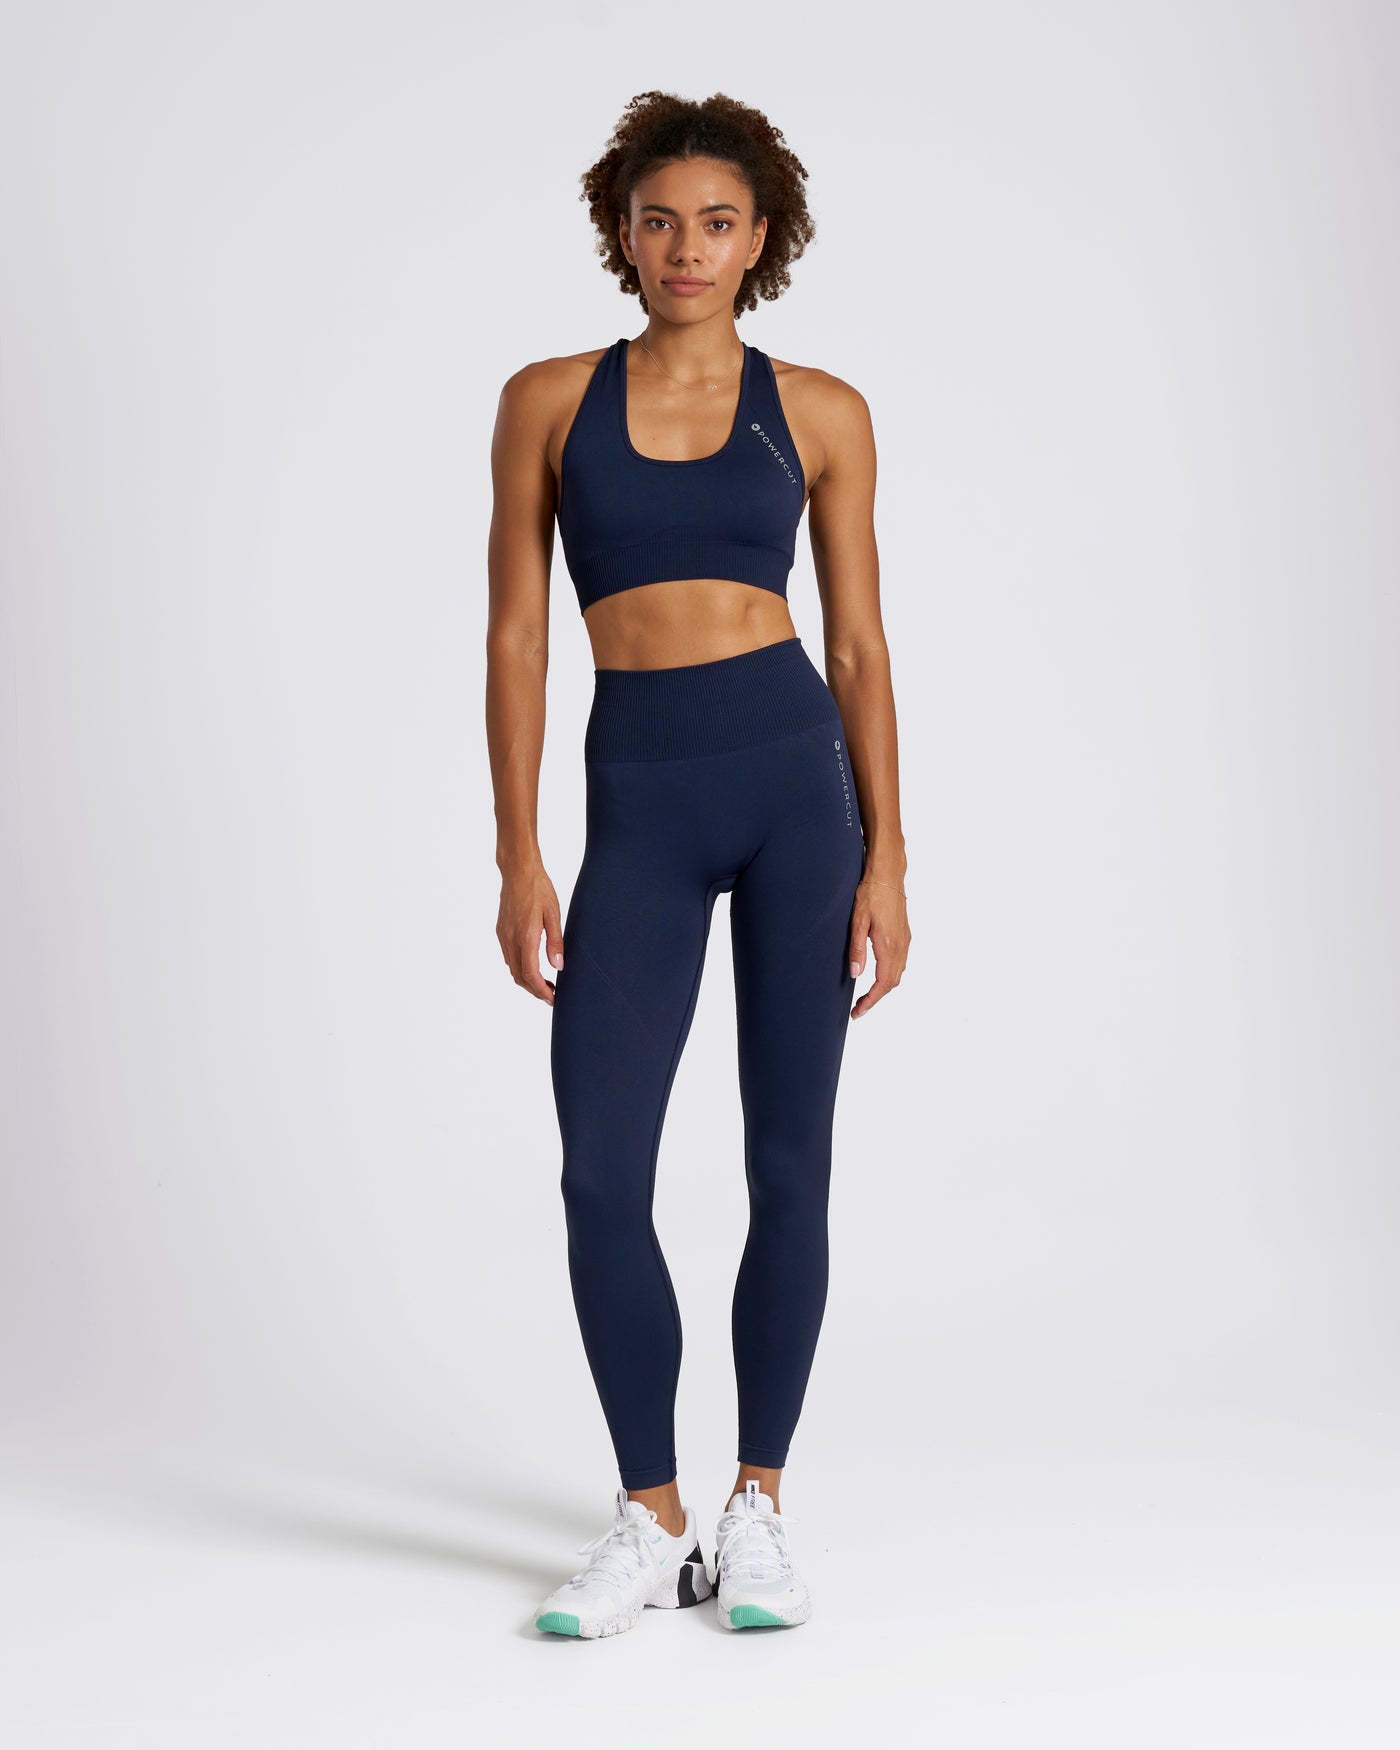 SOLID Seamless Compression Fit Full Length Navy Leggings